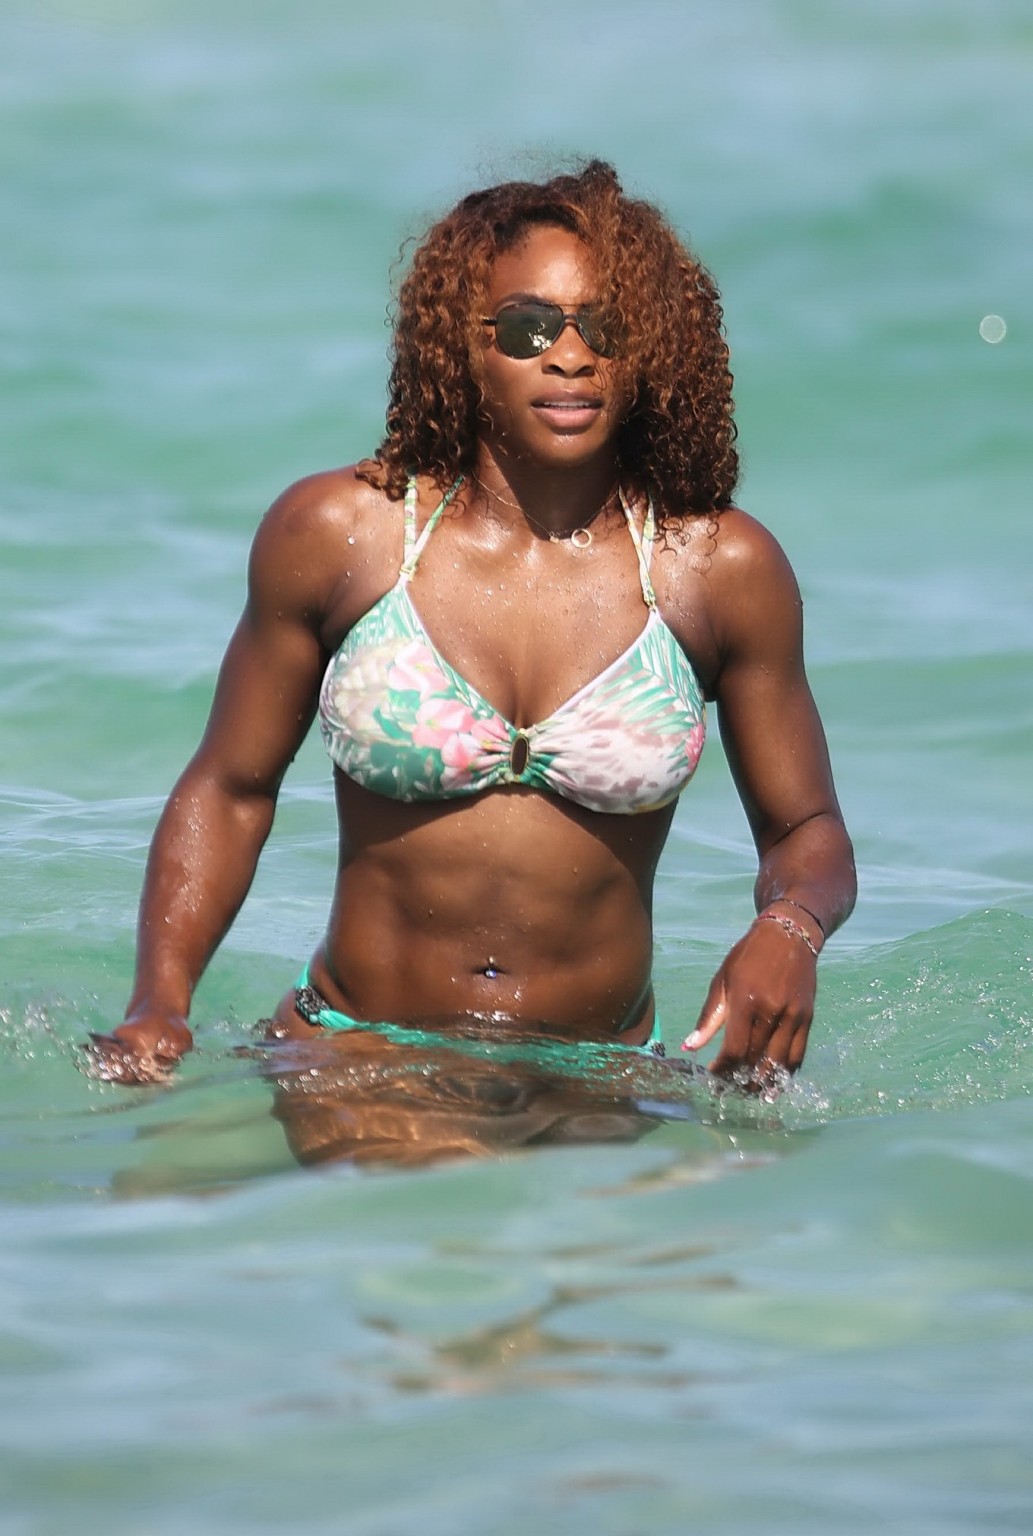 Serena Williams showing off her bikini curves at the beach in Miami #75228629